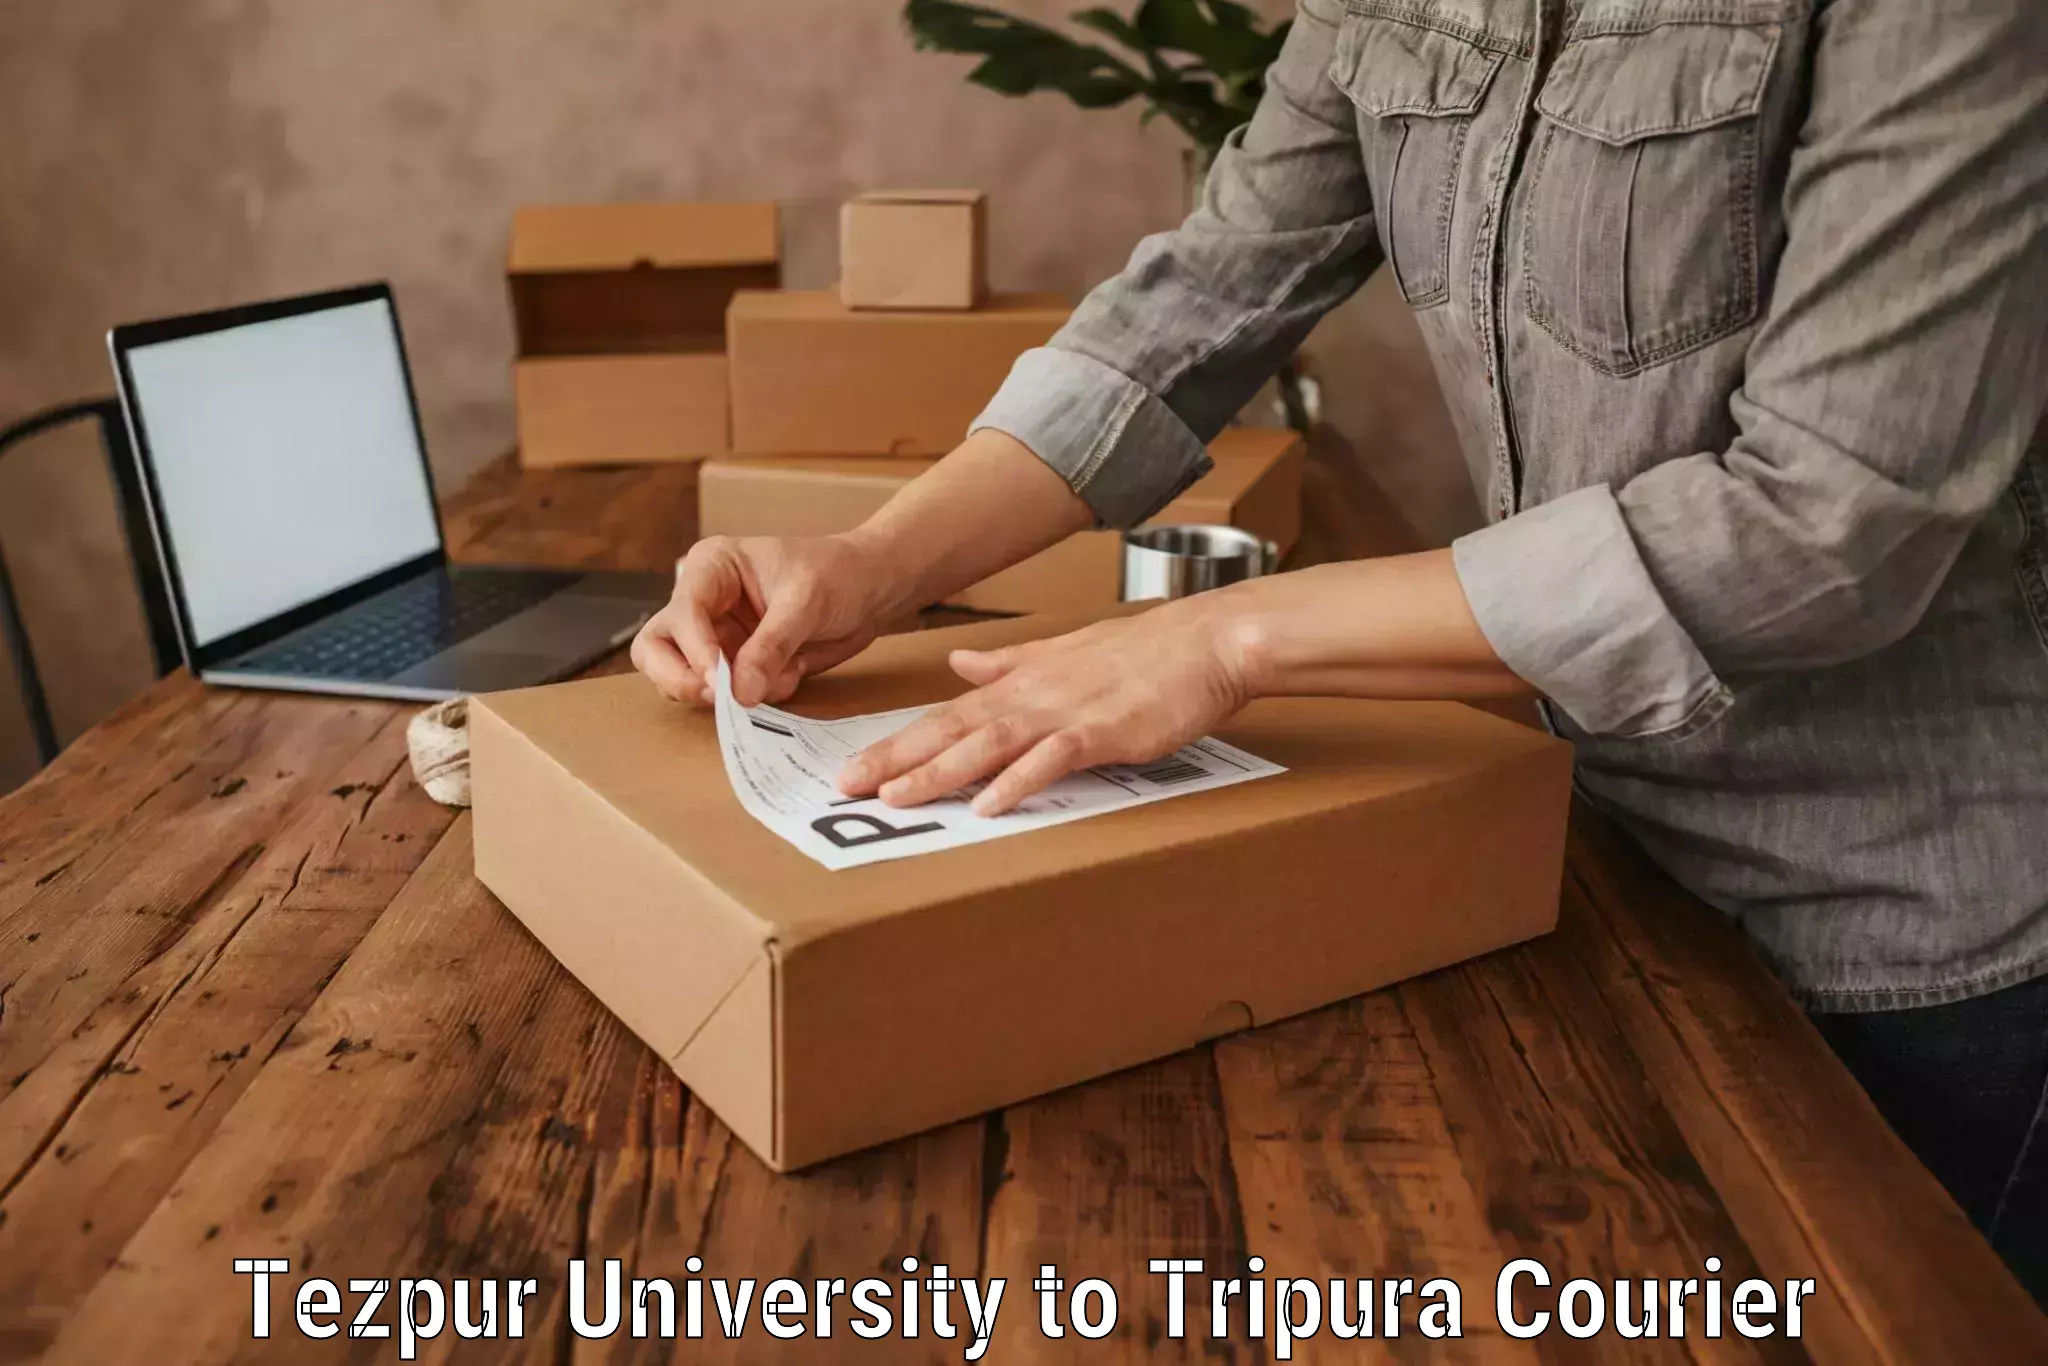 Luggage delivery network Tezpur University to South Tripura